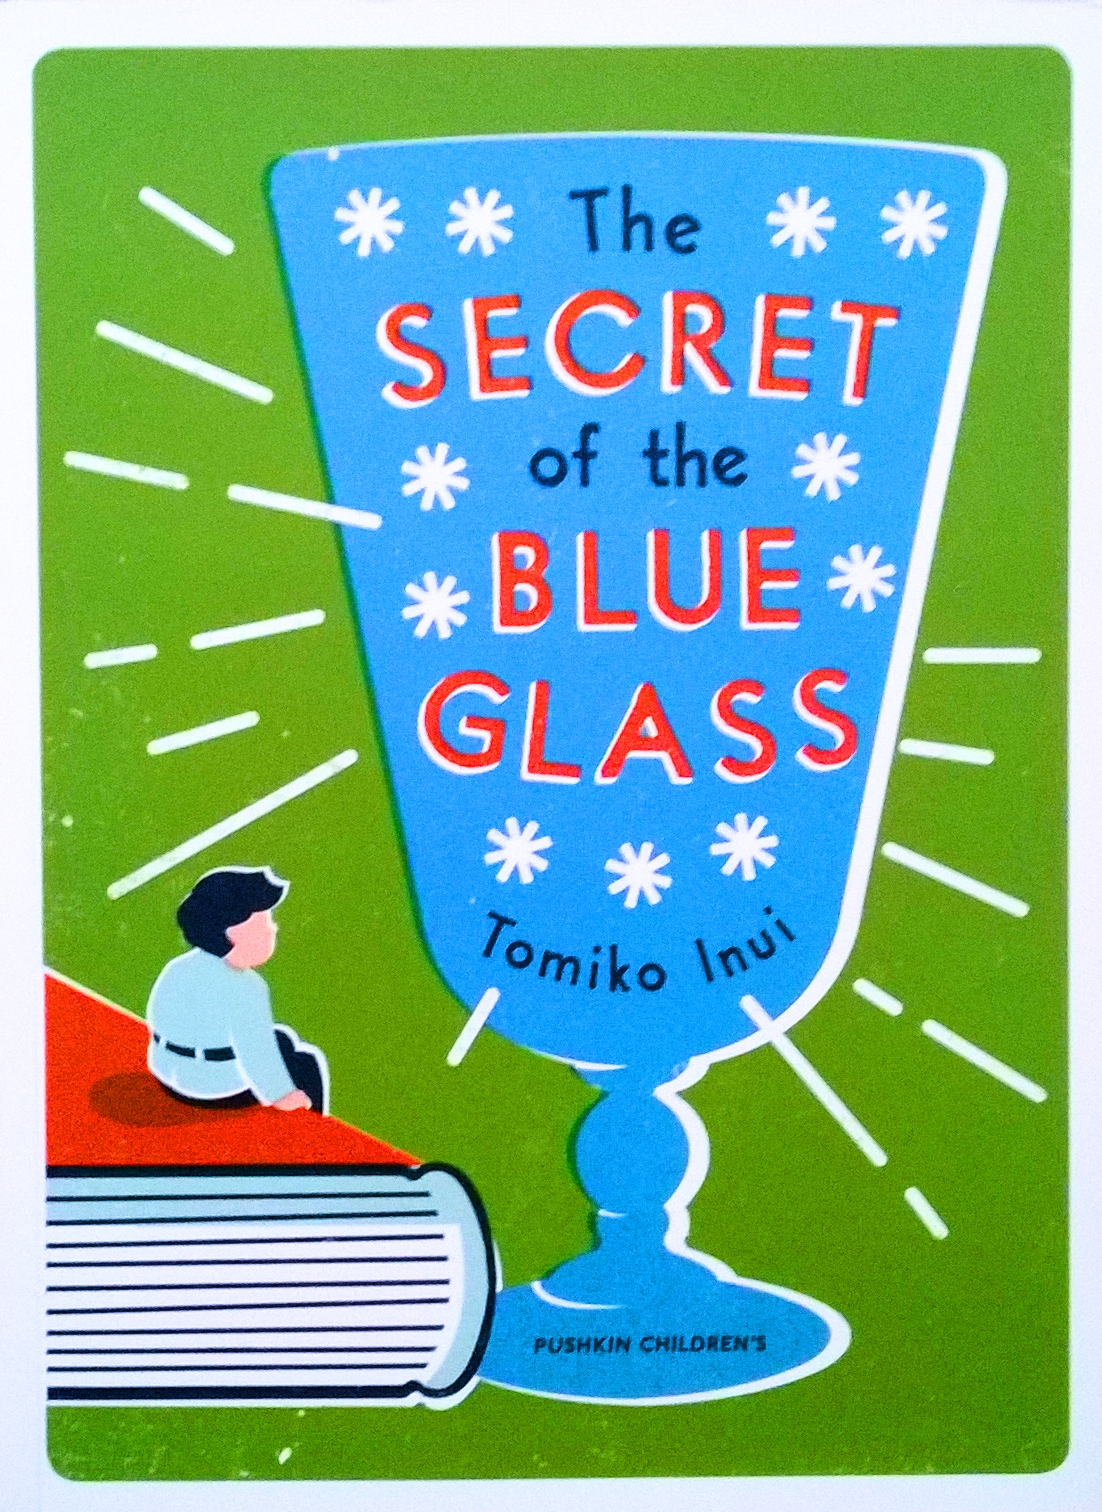 Cover for The Secret of the Blue Glass featuring an illustration of a small boy sitting on a book looking at a large graphic of a blue glass with flourishes indicating it is shining. The background is green.